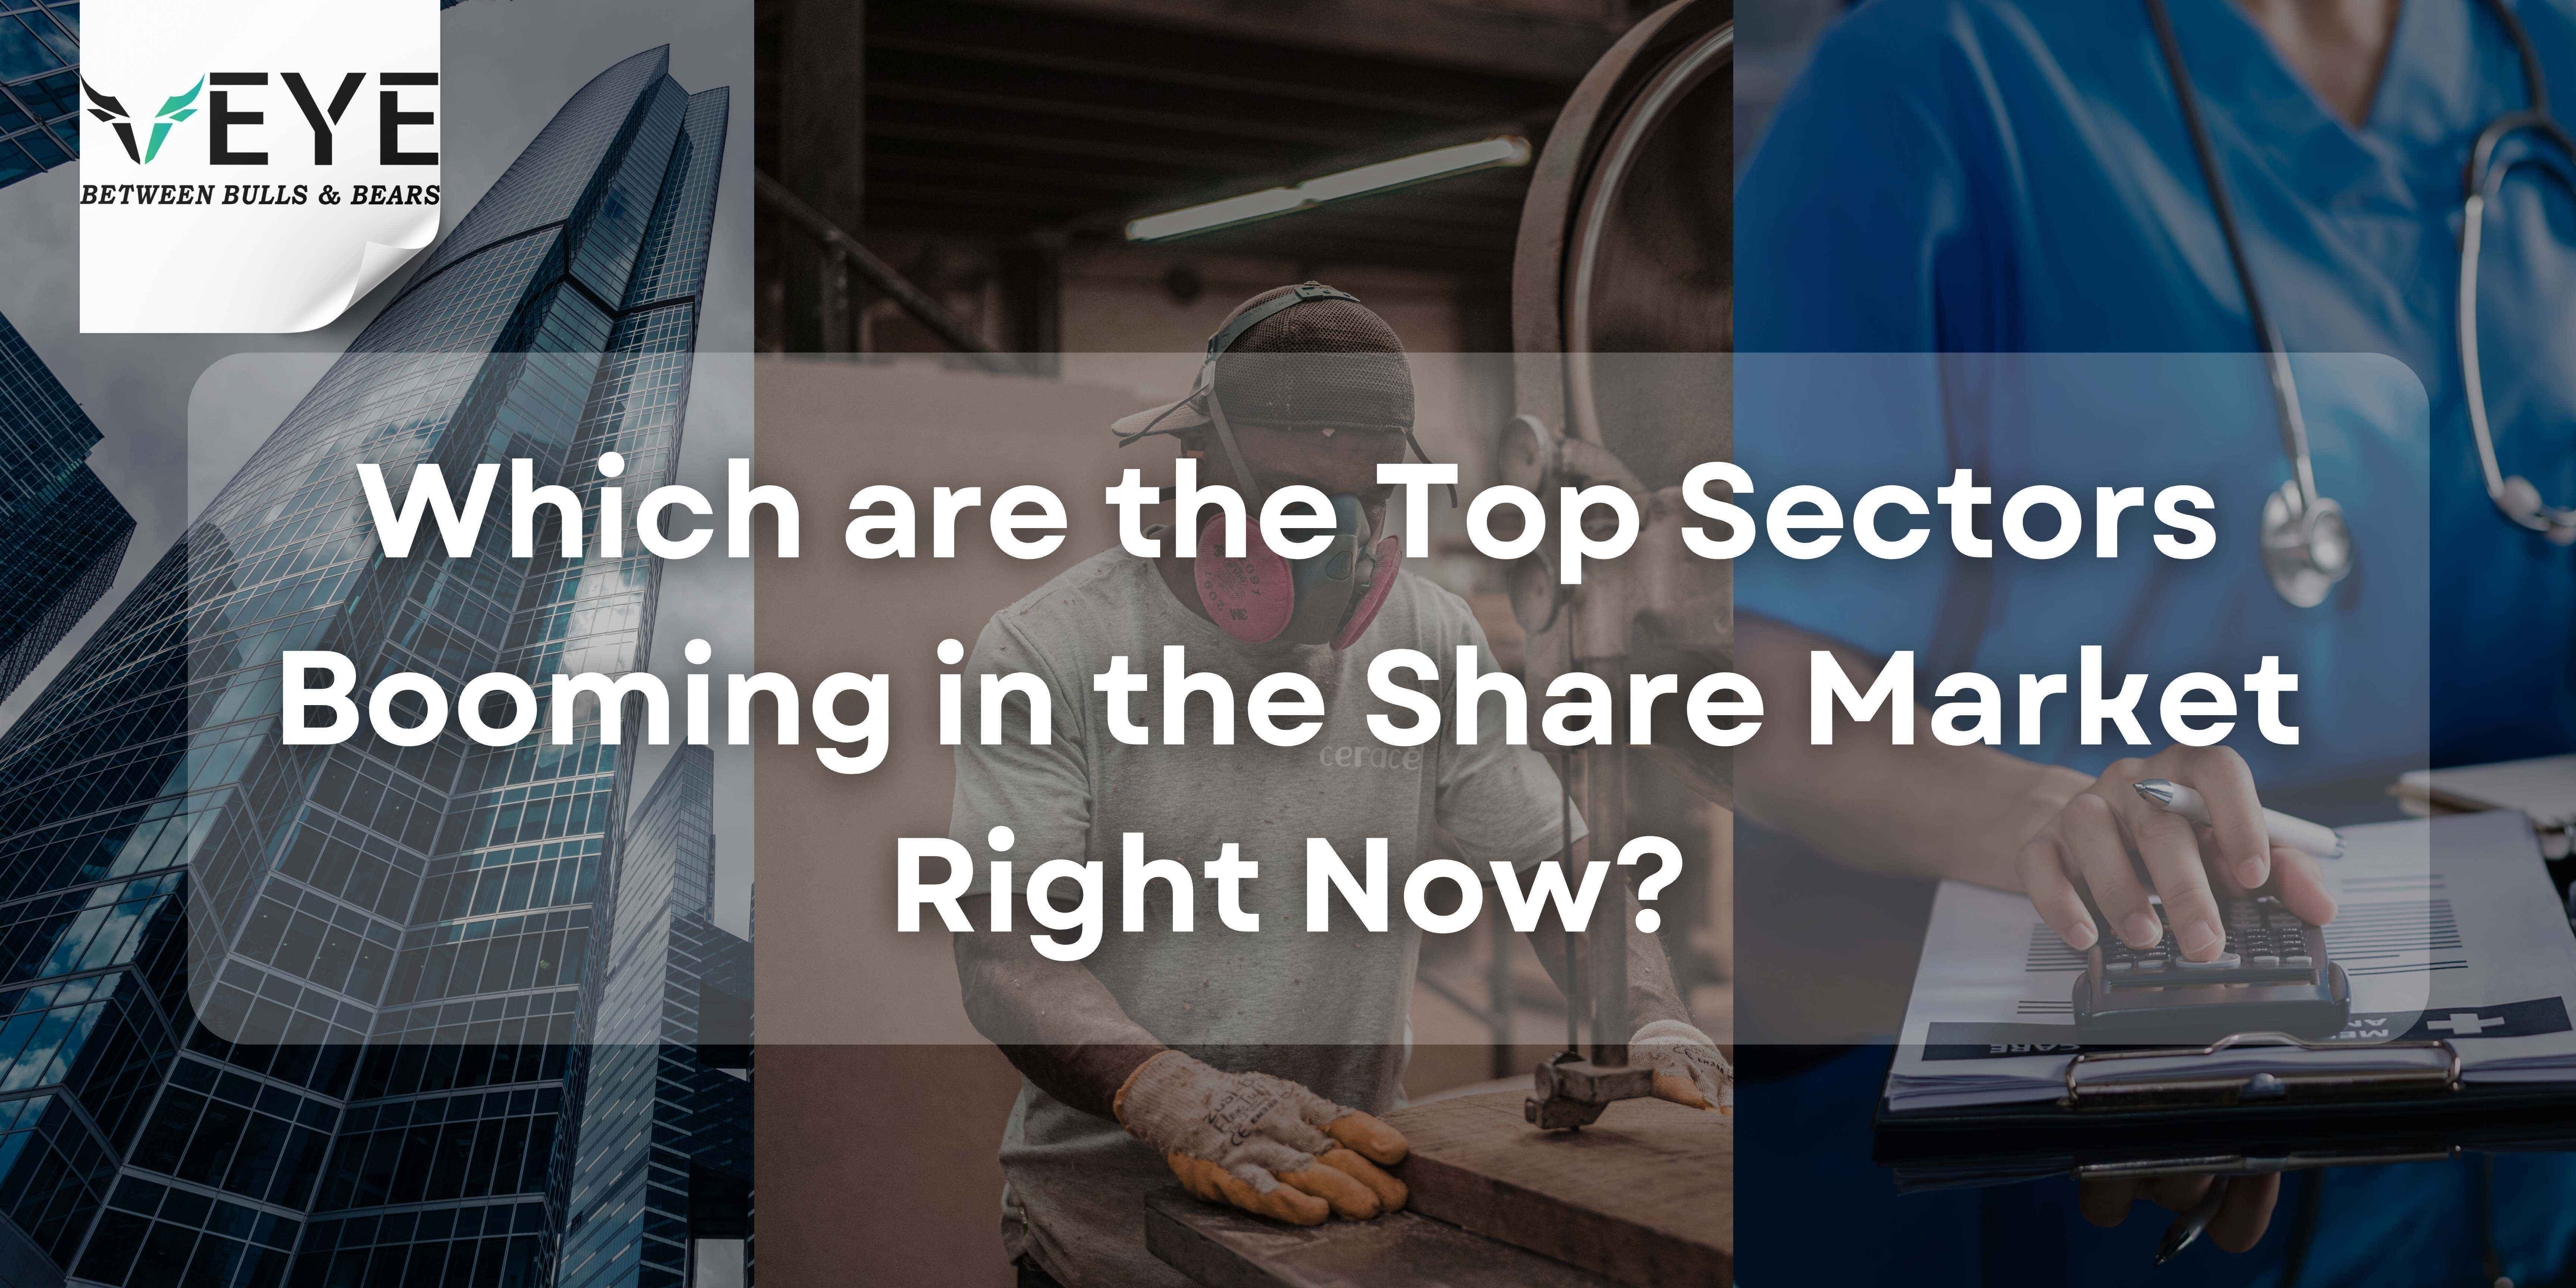 Which are the Top Sectors Booming in the Share Market Right Now?